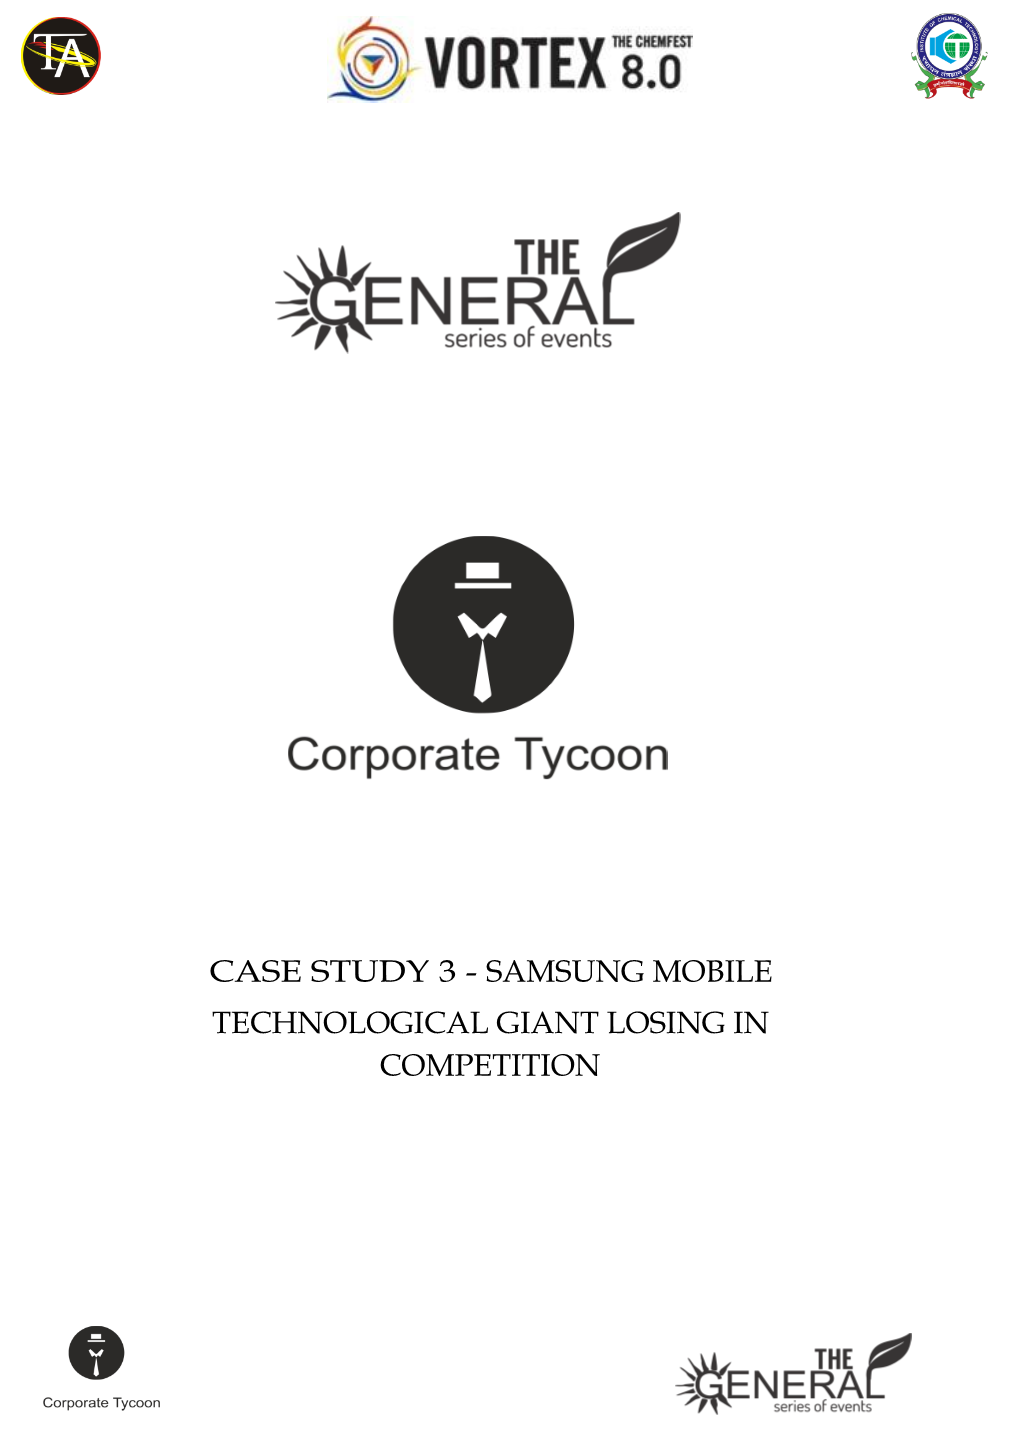 Case Study 3 - Samsung Mobile Technological Giant Losing in Competition